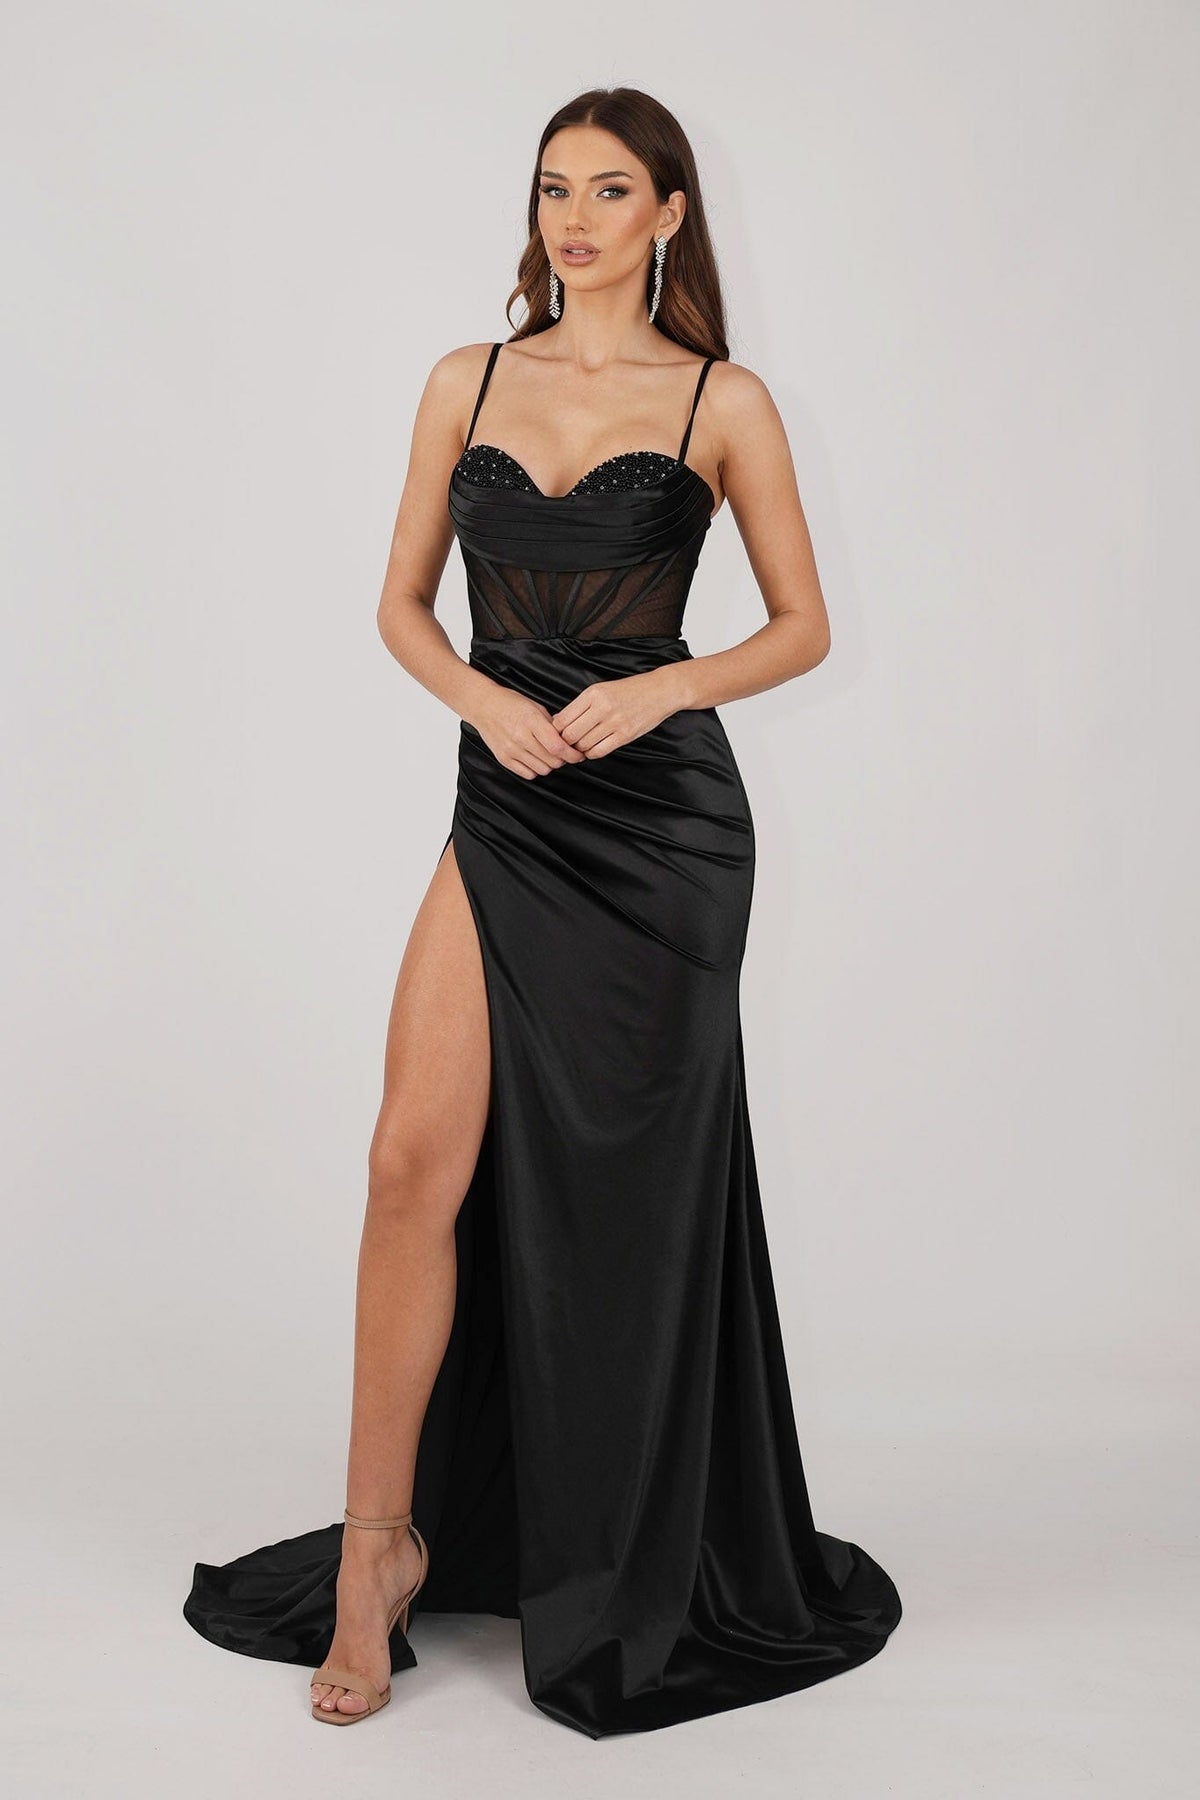 CRYSTAL Corset Gown - Black